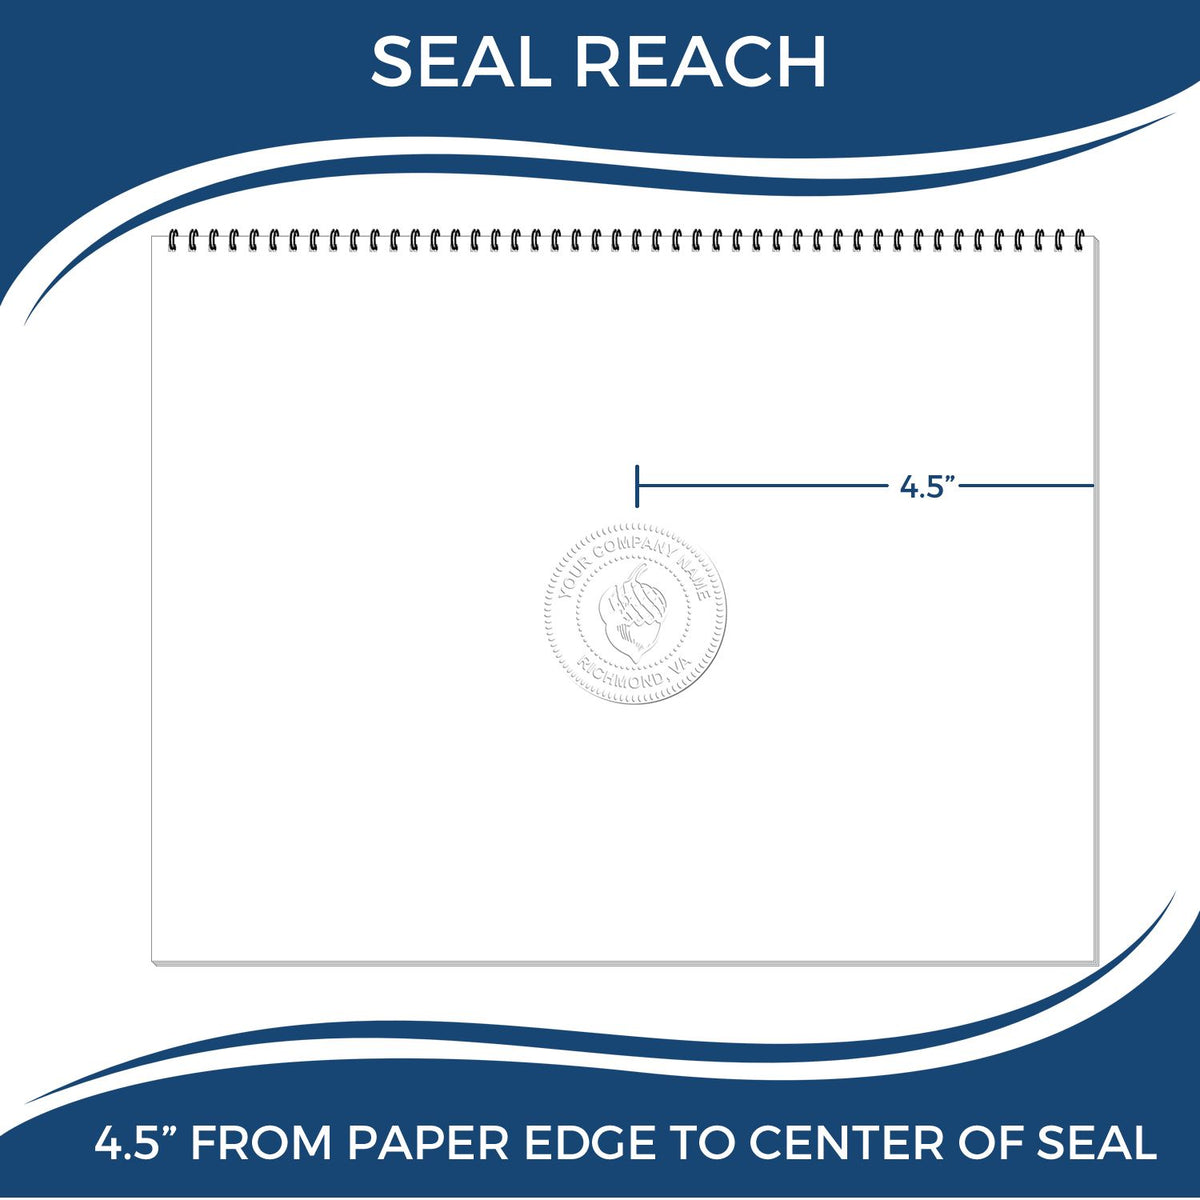 An infographic showing the seal reach which is represented by a ruler and a miniature seal image of the Extended Long Reach Indiana Surveyor Embosser